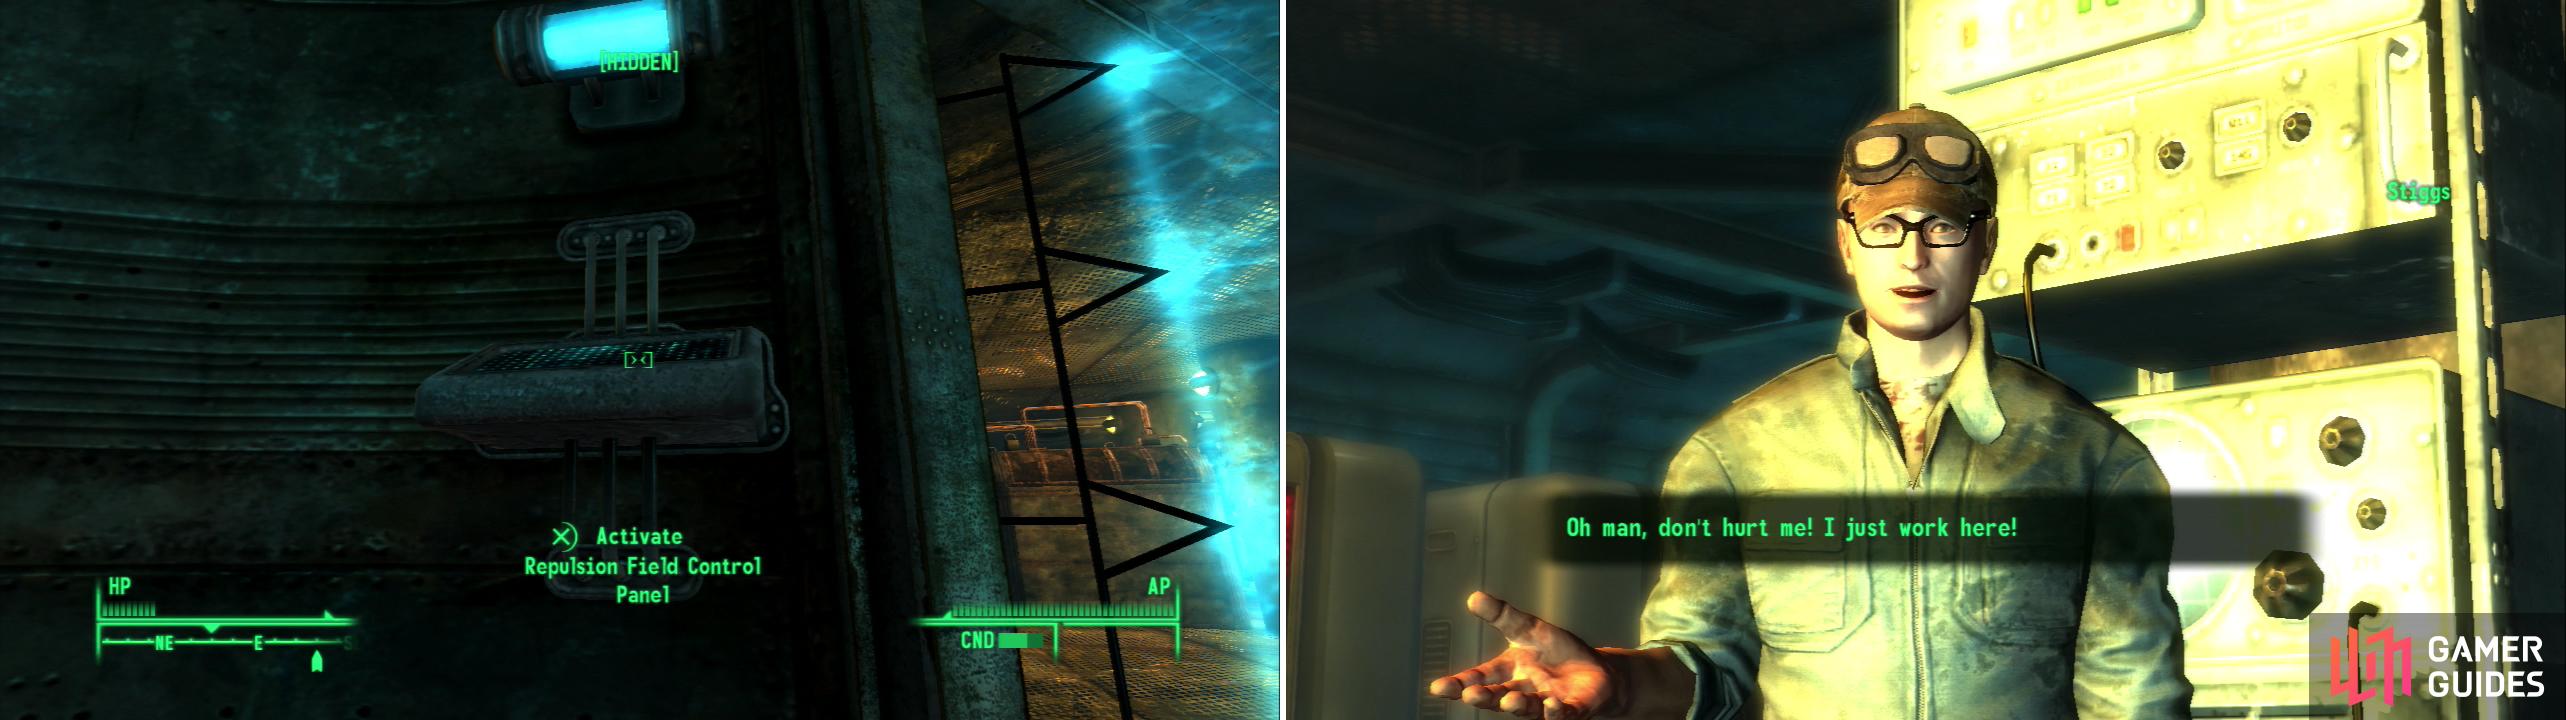 Navigating the Mobile Crawler will be easier if you have a high Science score, thanks to the Repulsion fields scattered about (left). Stiggs works for the Enclave against his will-if you have the Robotics Expert perk, he’ll pass on some useful information (right).